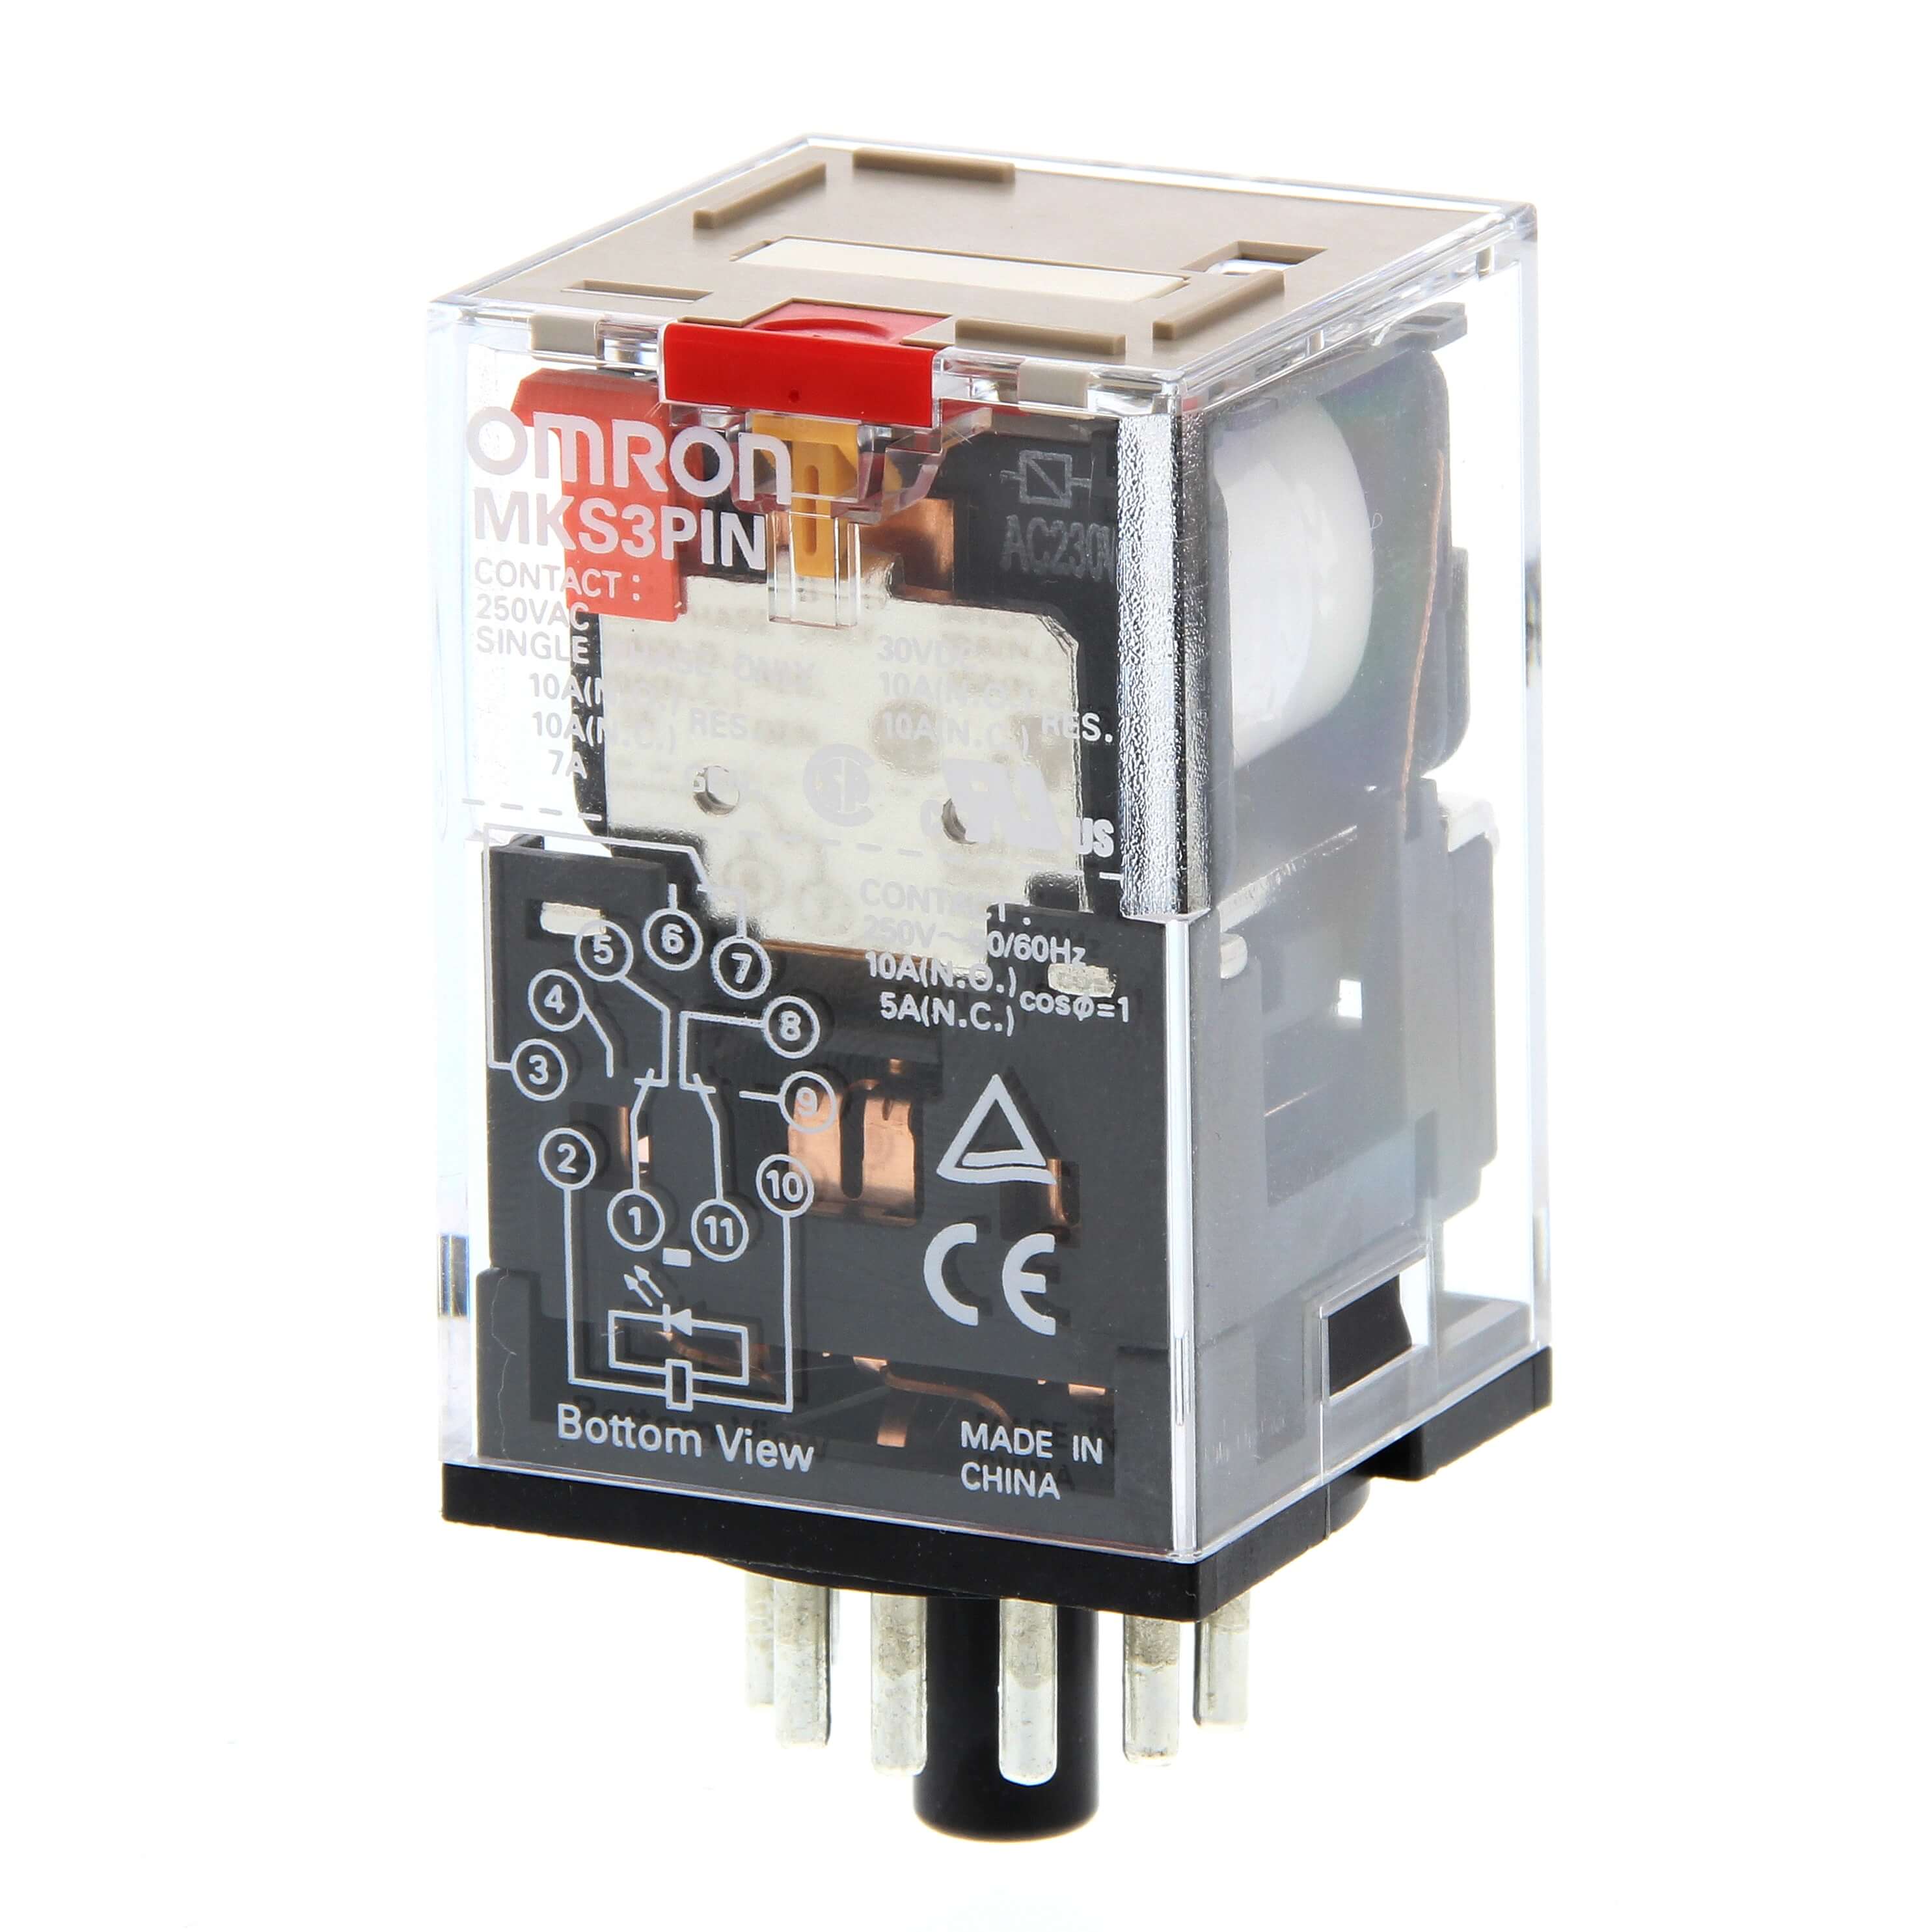 11.5 mA at 50 and 10 mA at 60 Hz Rated Load Current Omron MKS3PI-5 AC230 General Purpose Relay with Mechanical Indicator and Lockable Test Button 120 VA Basic Model Type Triple Pole Double Throw Contacts Standard Internal Connections Plug-In Terminal 